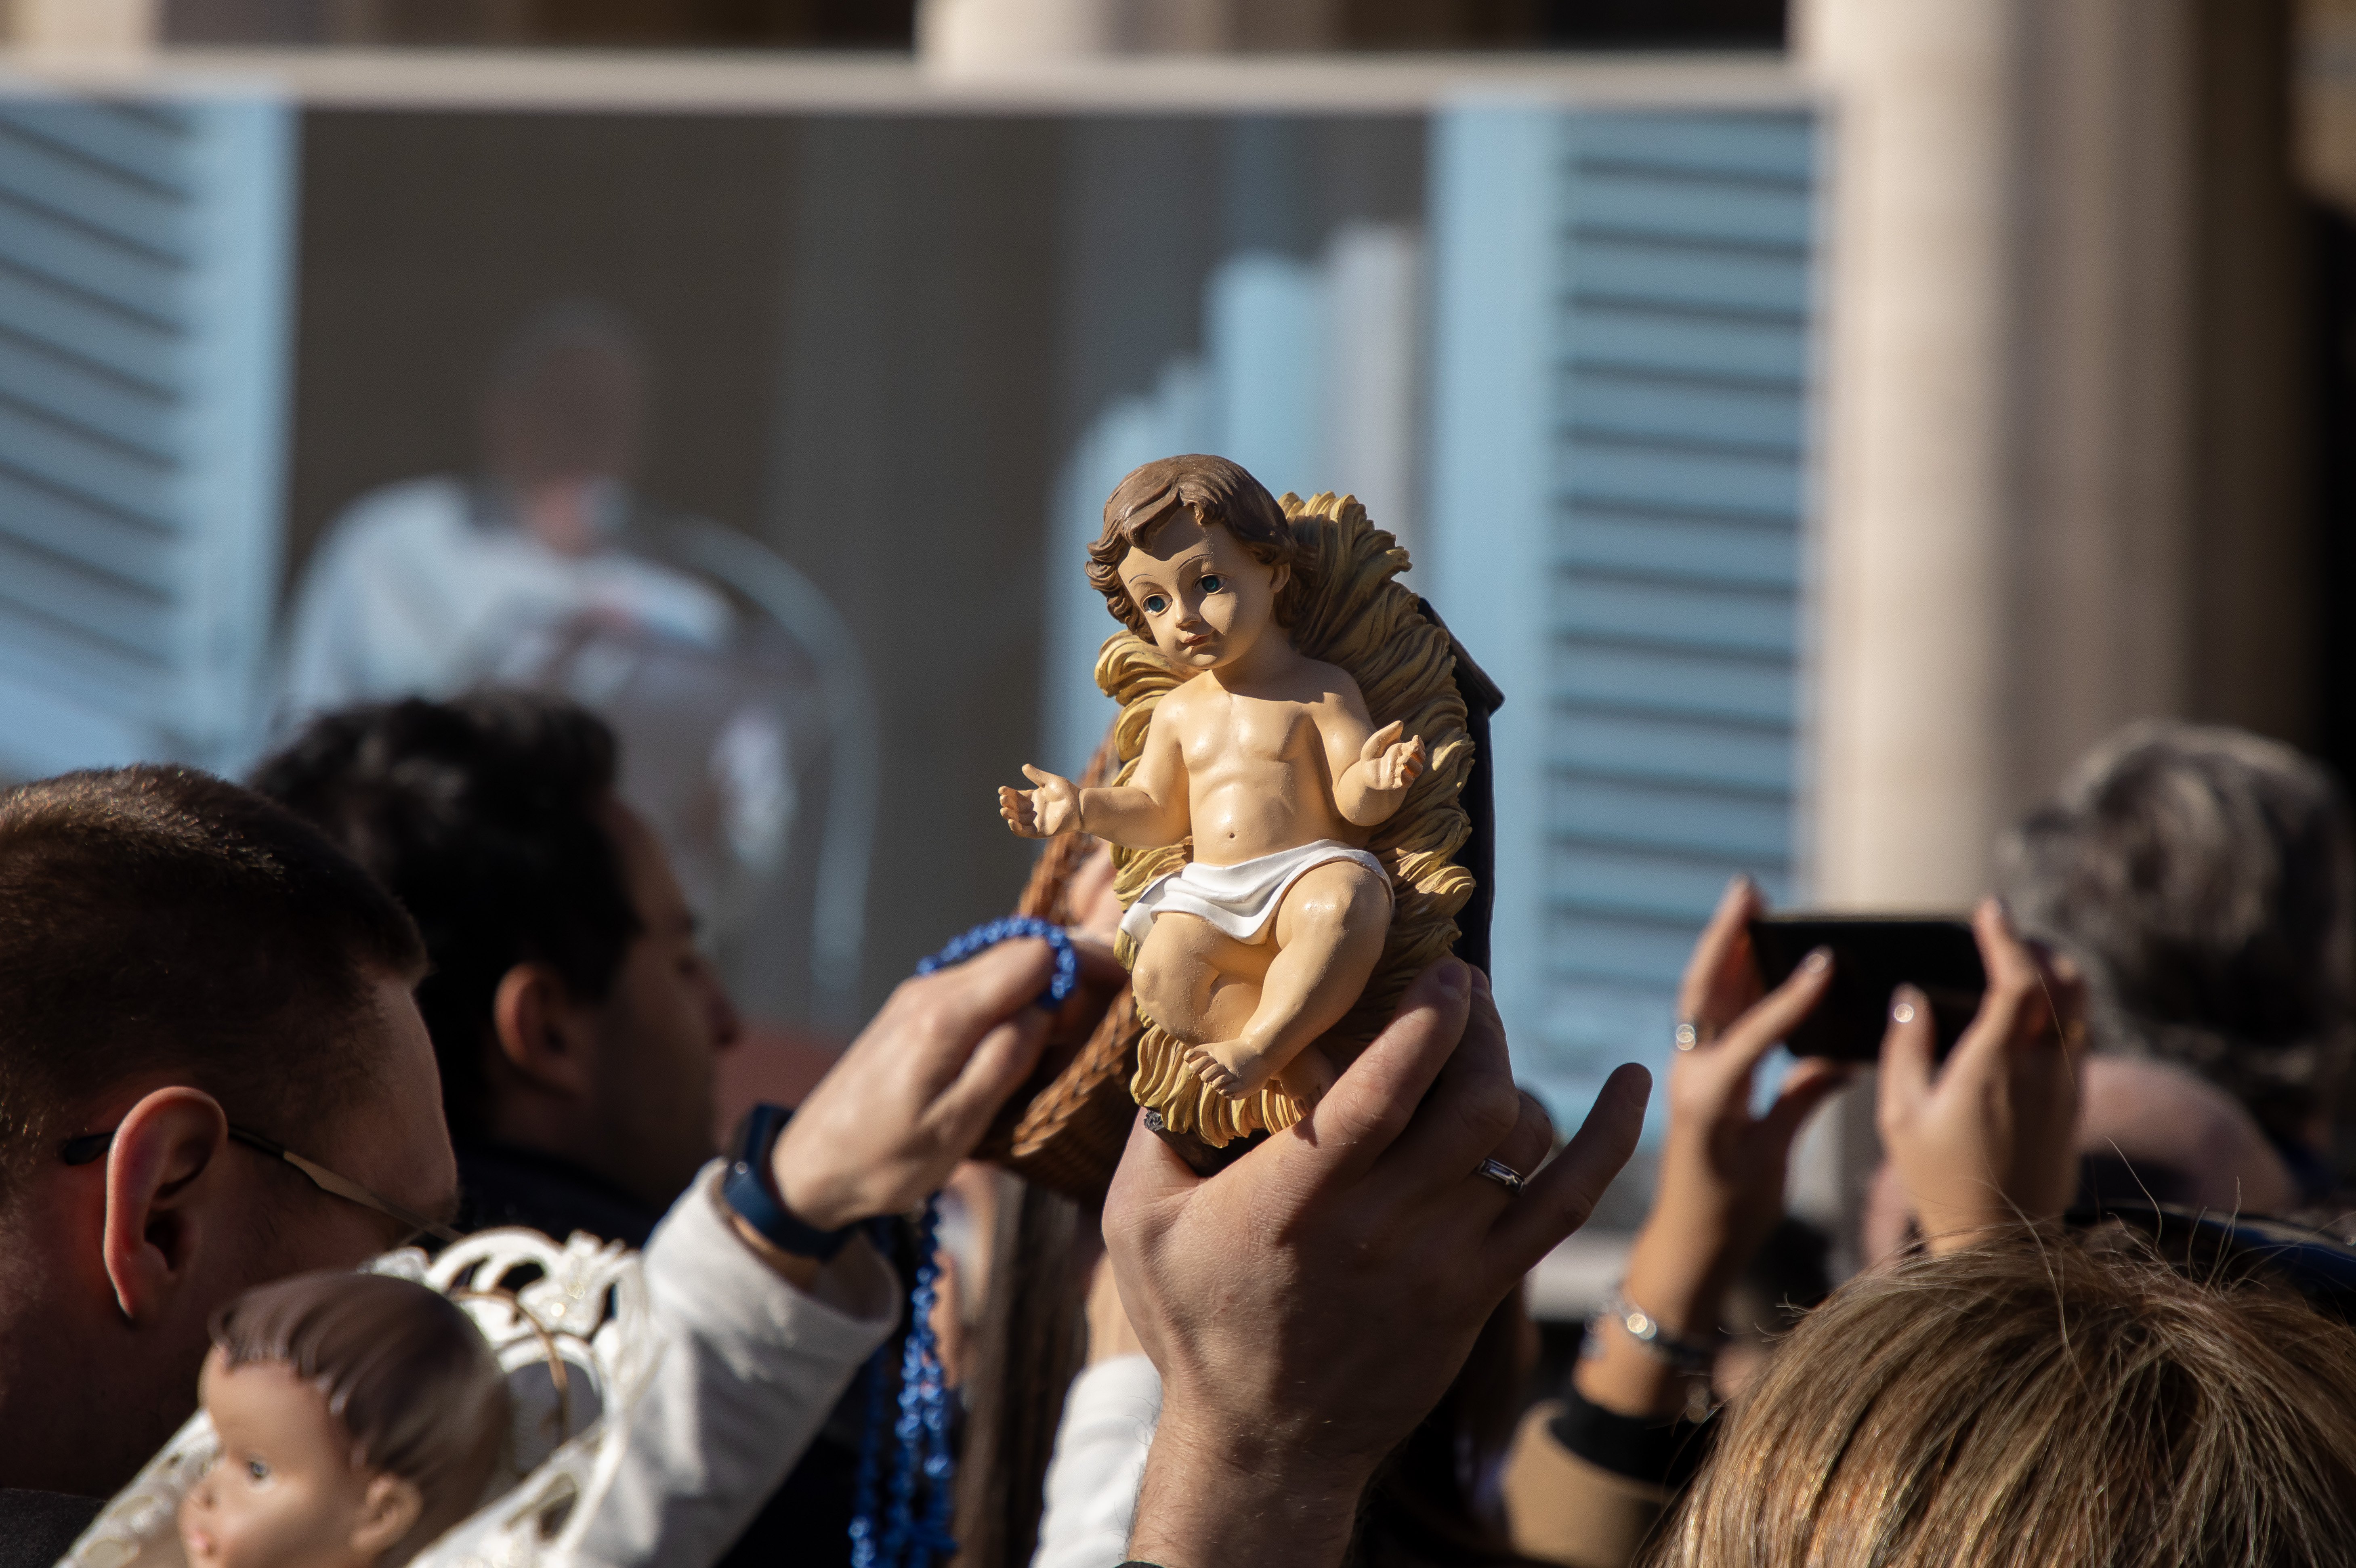 People hold up Nativity scene figurines of the baby Jesus for Pope Francis to bless.